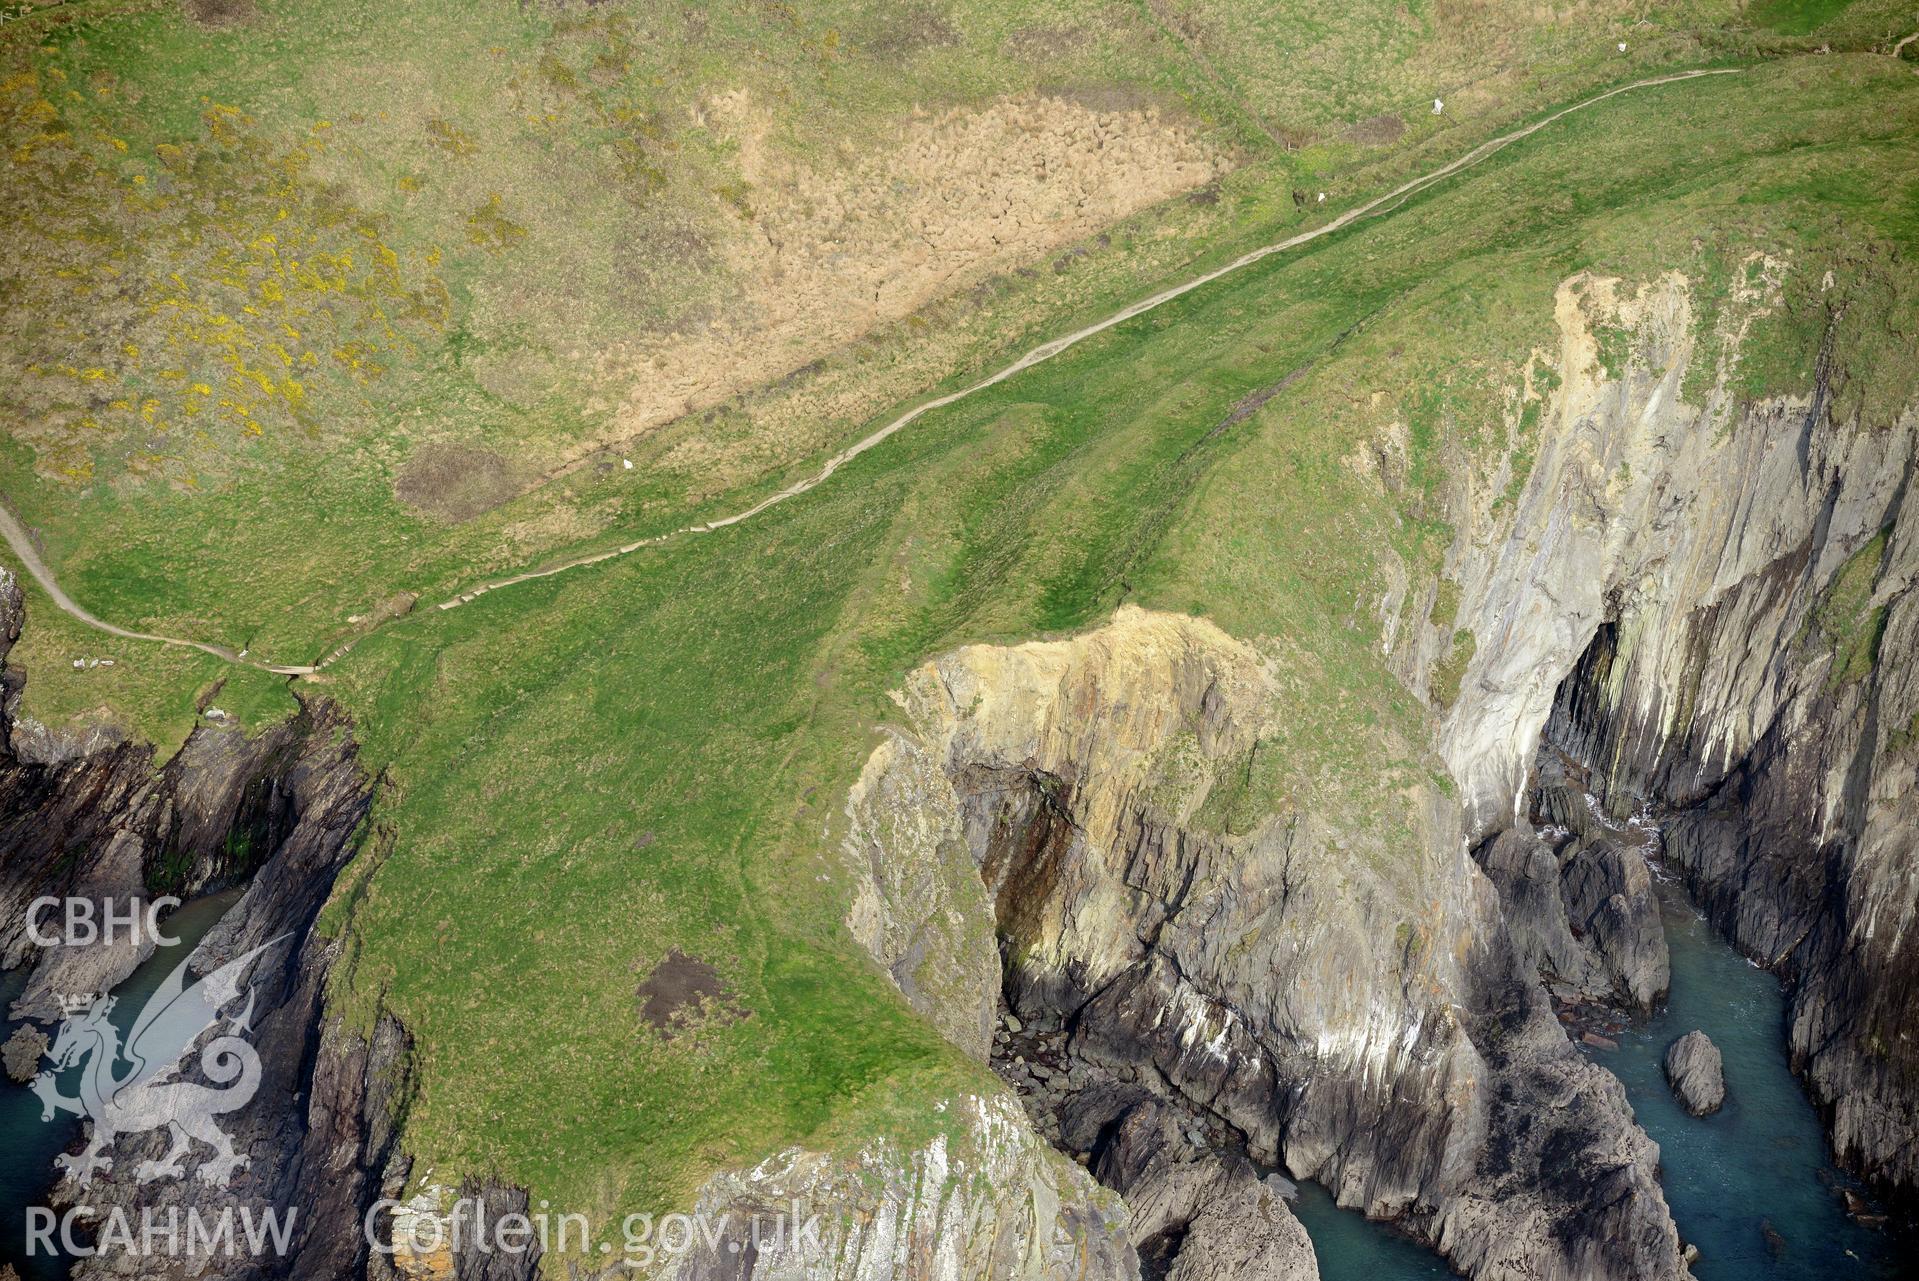 Aerial photography of Porth y Rhaw promontory fort taken on 27th March 2017 for structure from motion recording. Baseline aerial reconnaissance survey for the CHERISH Project. ? Crown: CHERISH PROJECT 2019. Produced with EU funds through the Ireland Wales Co-operation Programme 2014-2020. All material made freely available through the Open Government Licence.